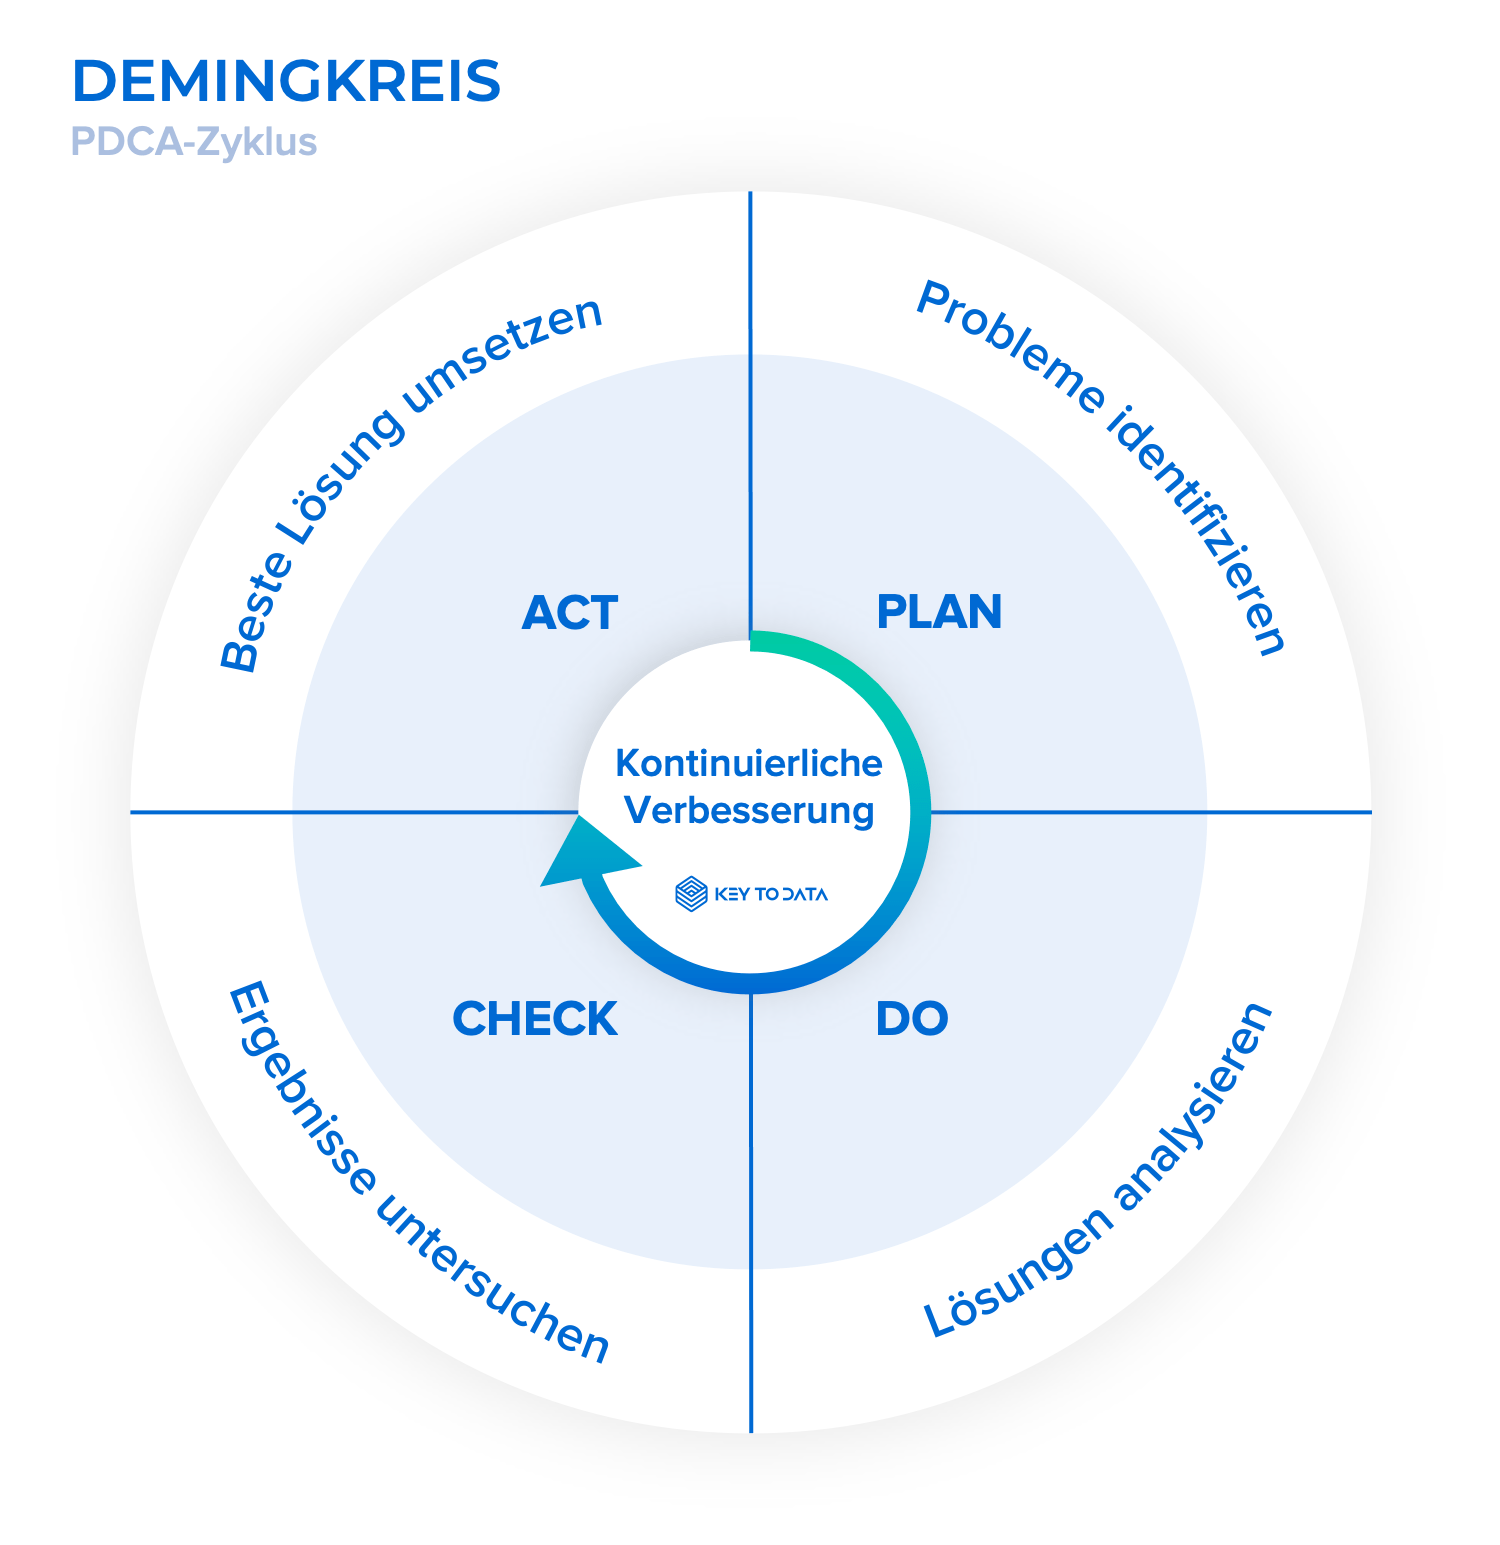 Deming circle: PDCA cycle in TQM